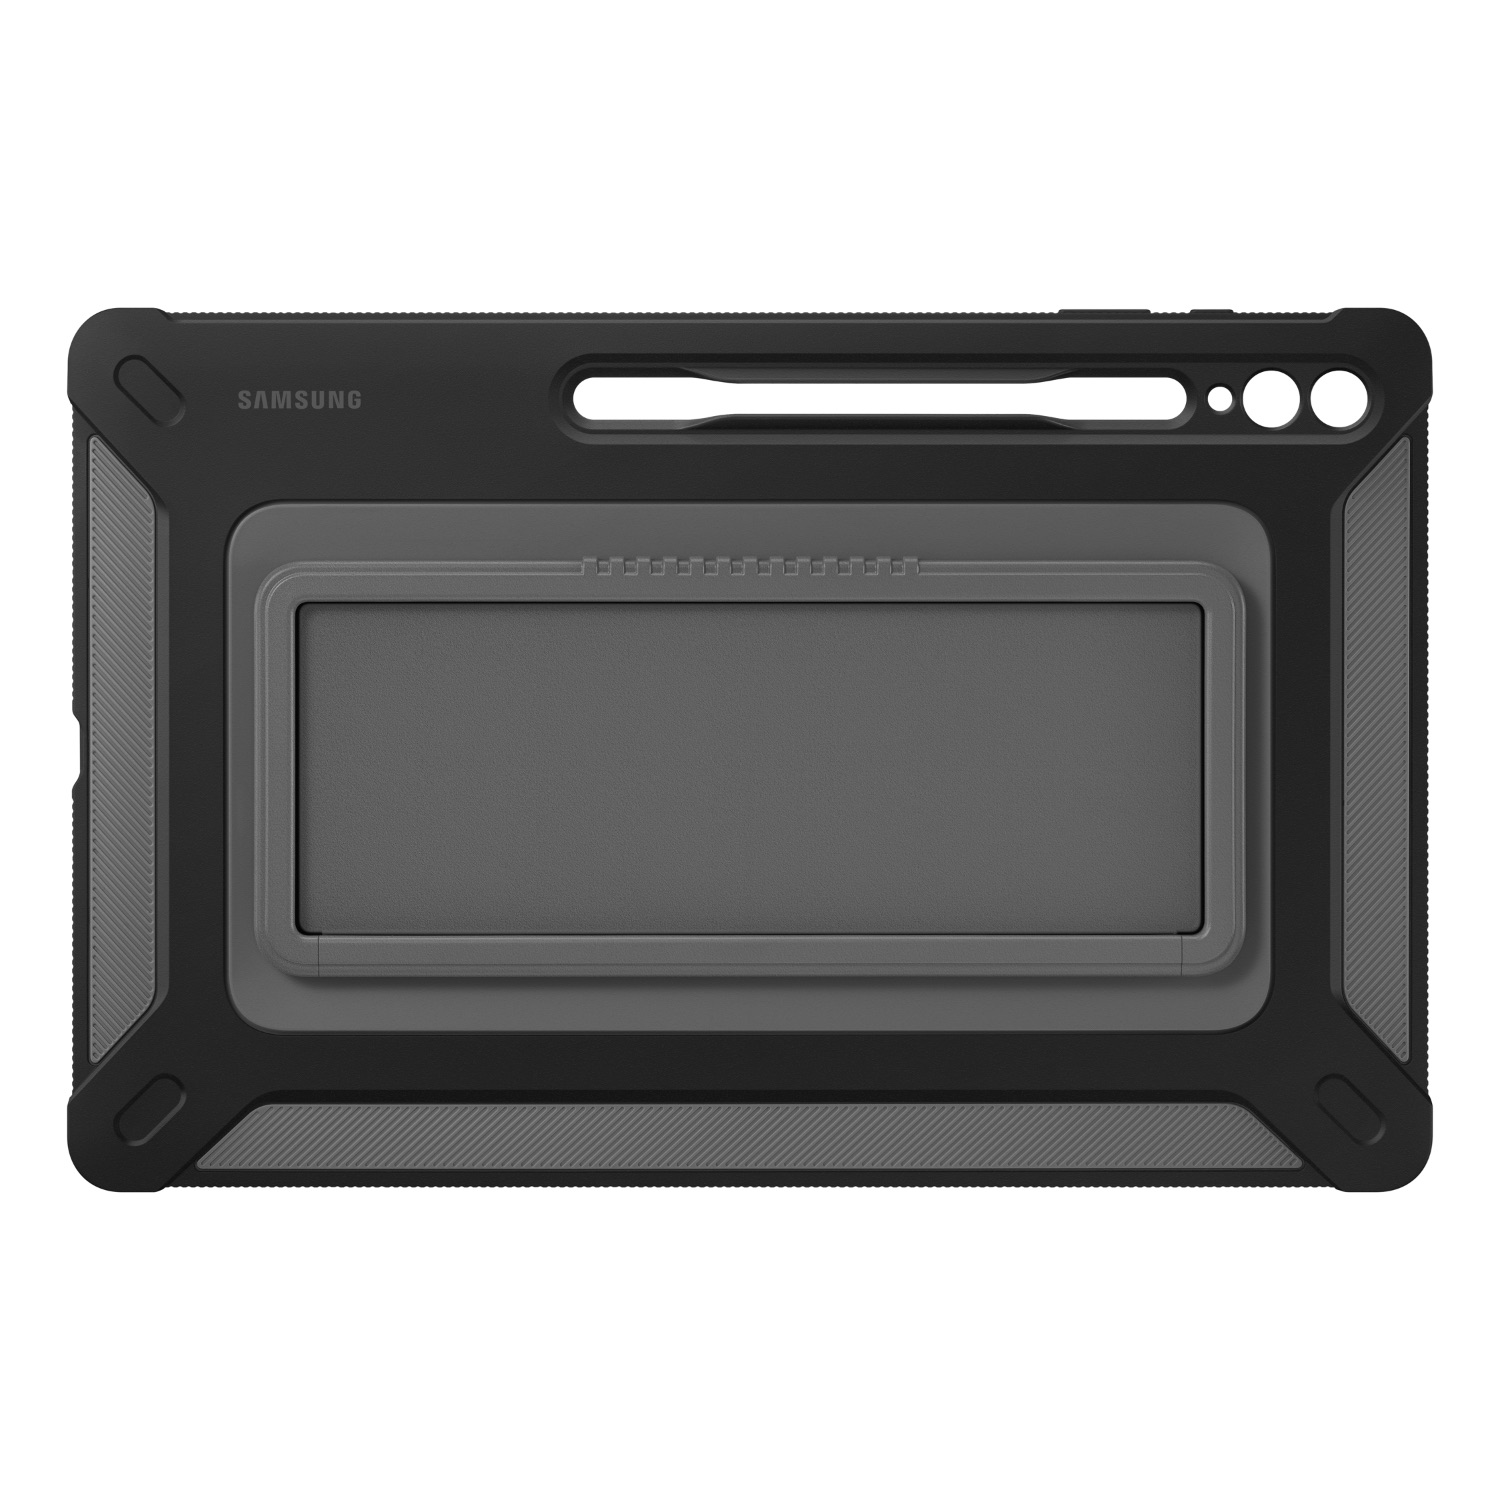 Tablet Covers for Samsung mobile devices